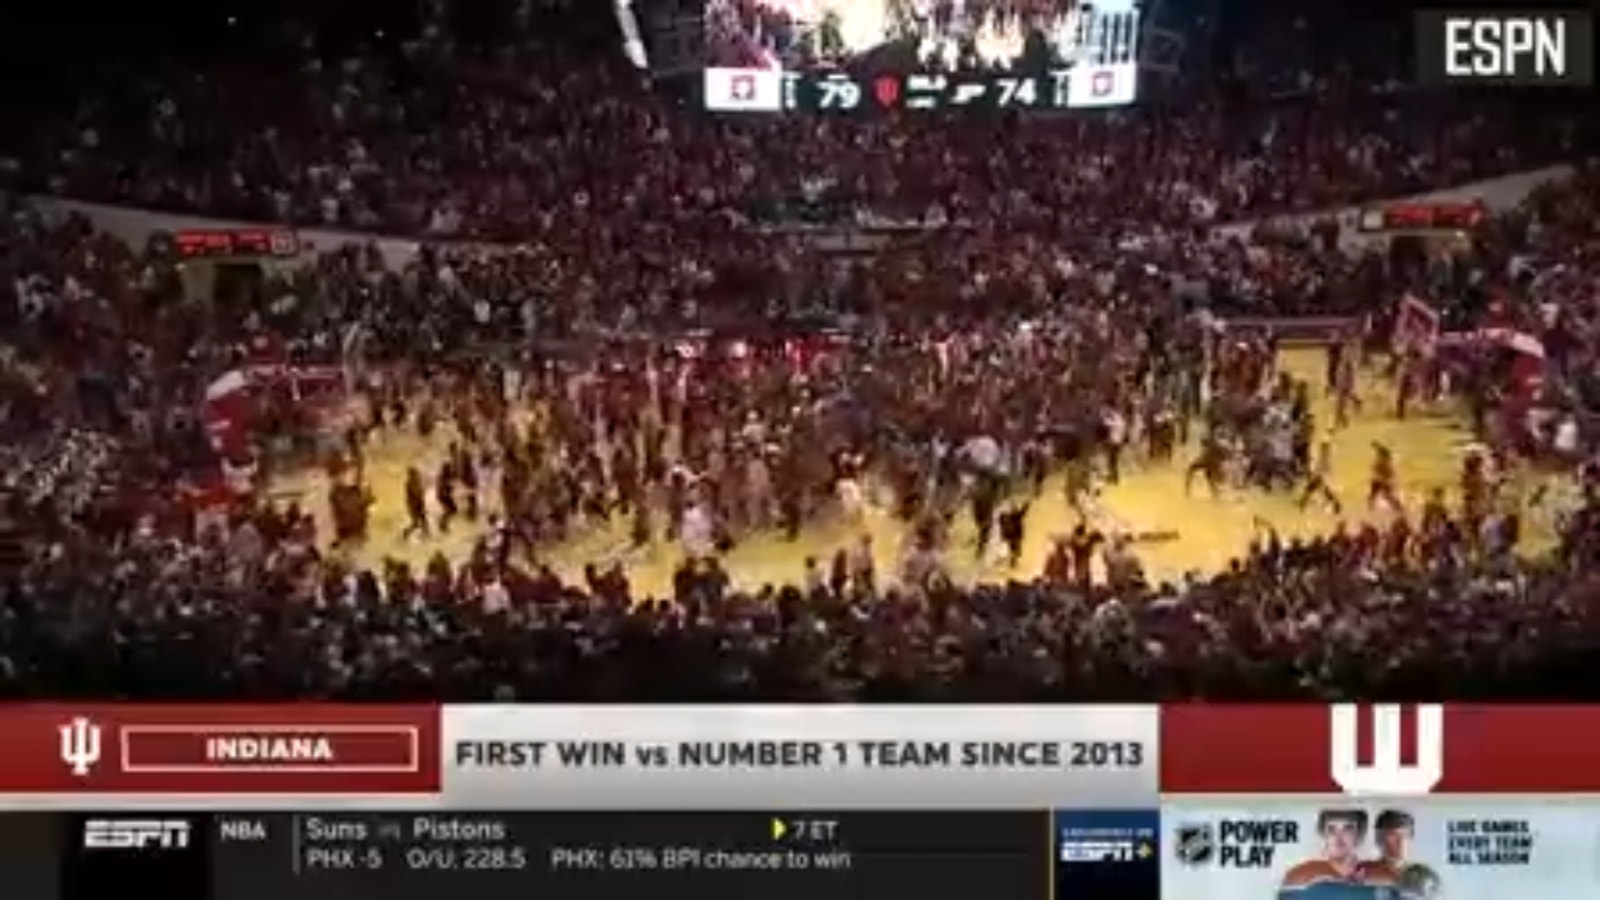 Fans storm the court after Indiana's takedown